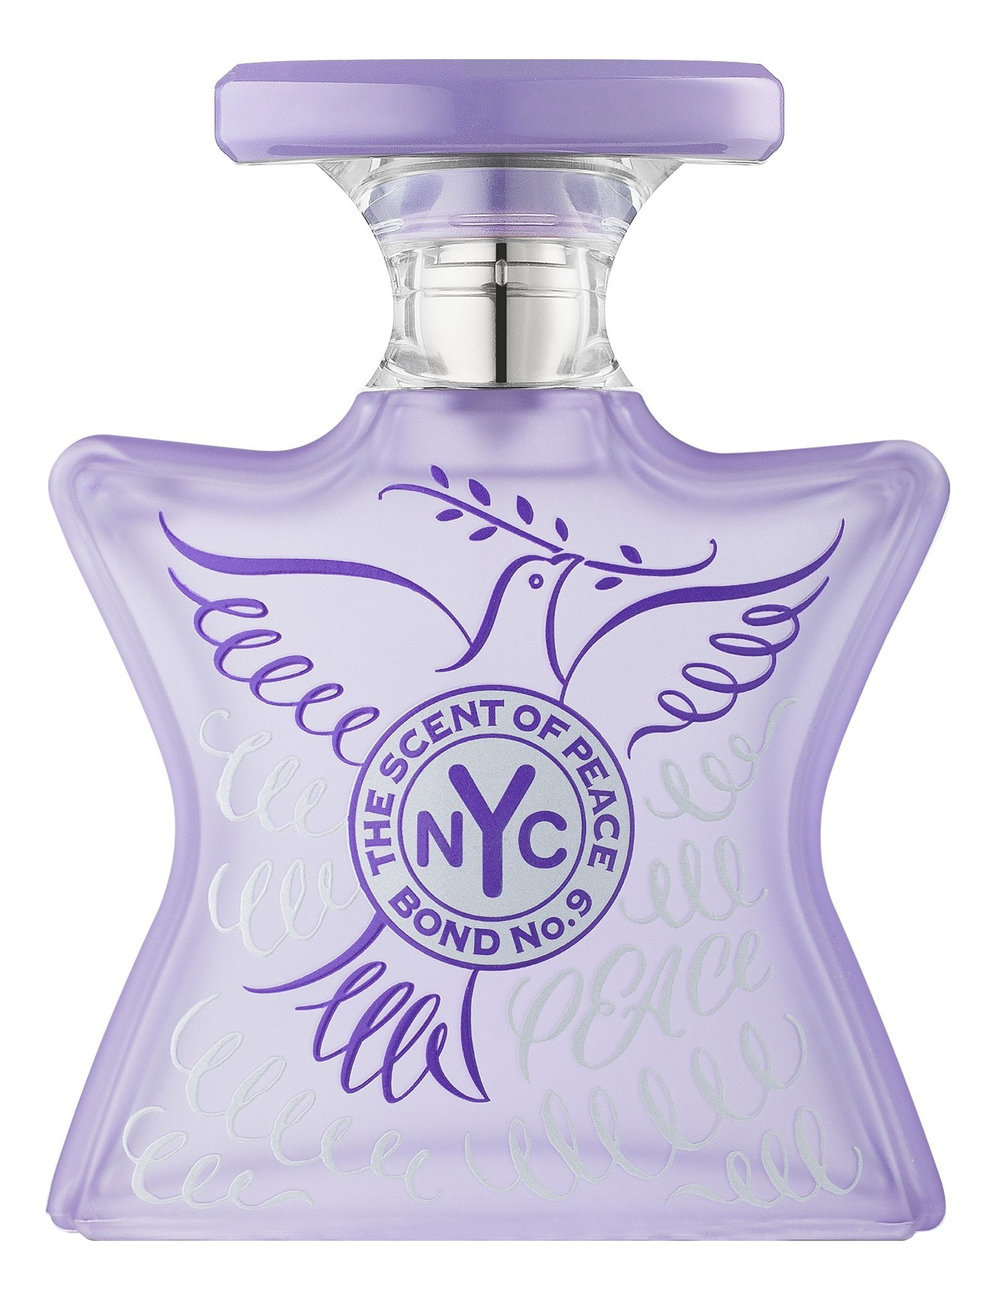 The Scent of Peace: парфюмерная вода 100мл уценка 5th avenue nyc red